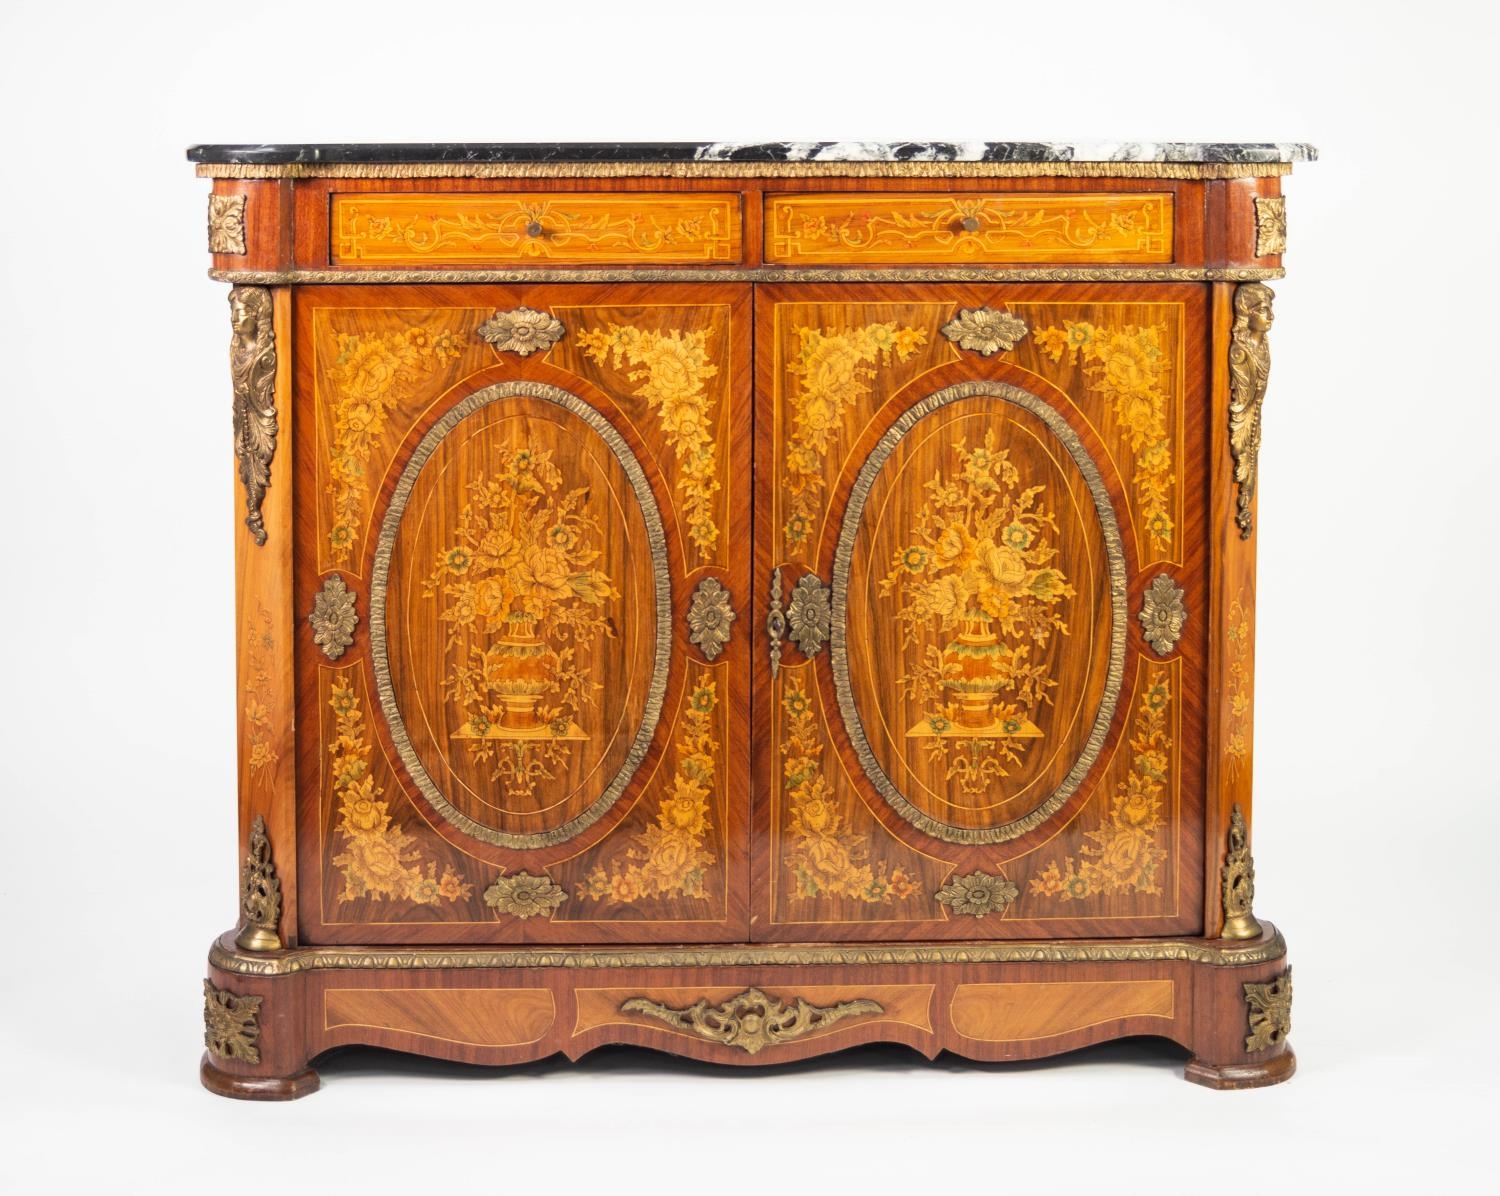 TWENTIETH CENTURY CONTINENTAL GILT METAL MOUNTED MAHOGANY AND INLAID SIDE CABINET WITH BLACK - Image 2 of 4